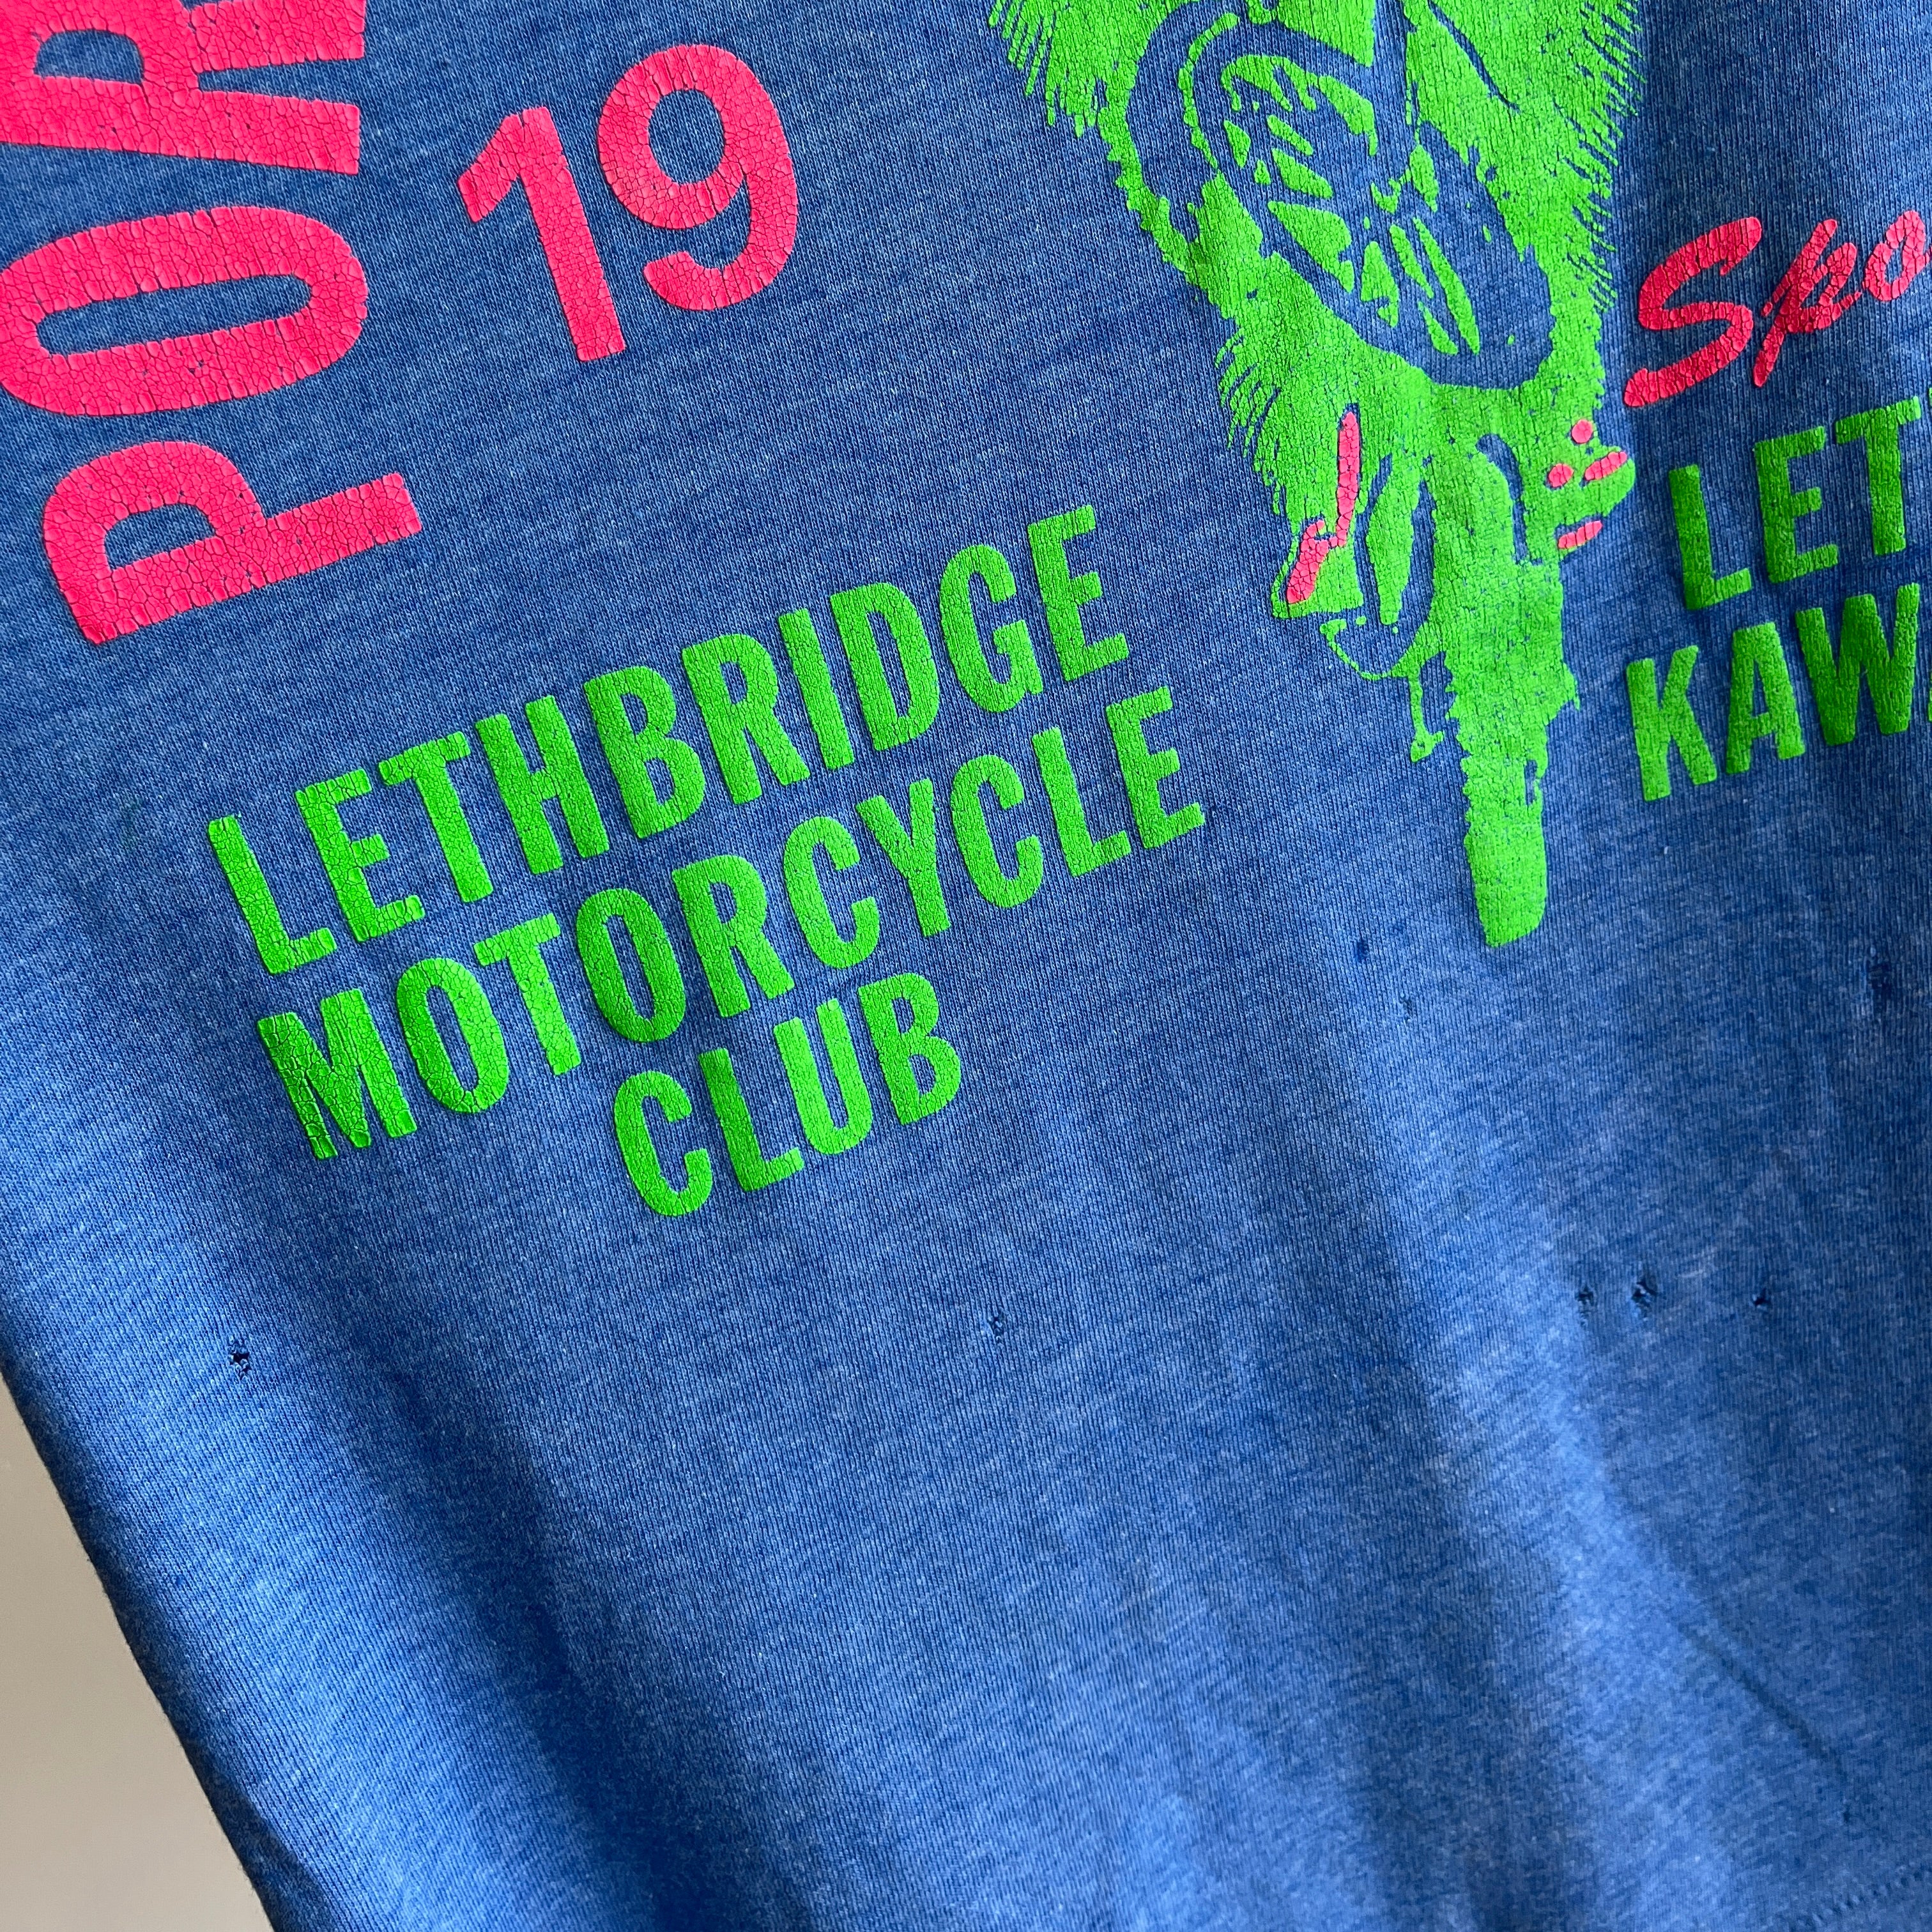 1990 Porcupine X-Country Motorcycle Club Super Rad and Thin T-Shirt